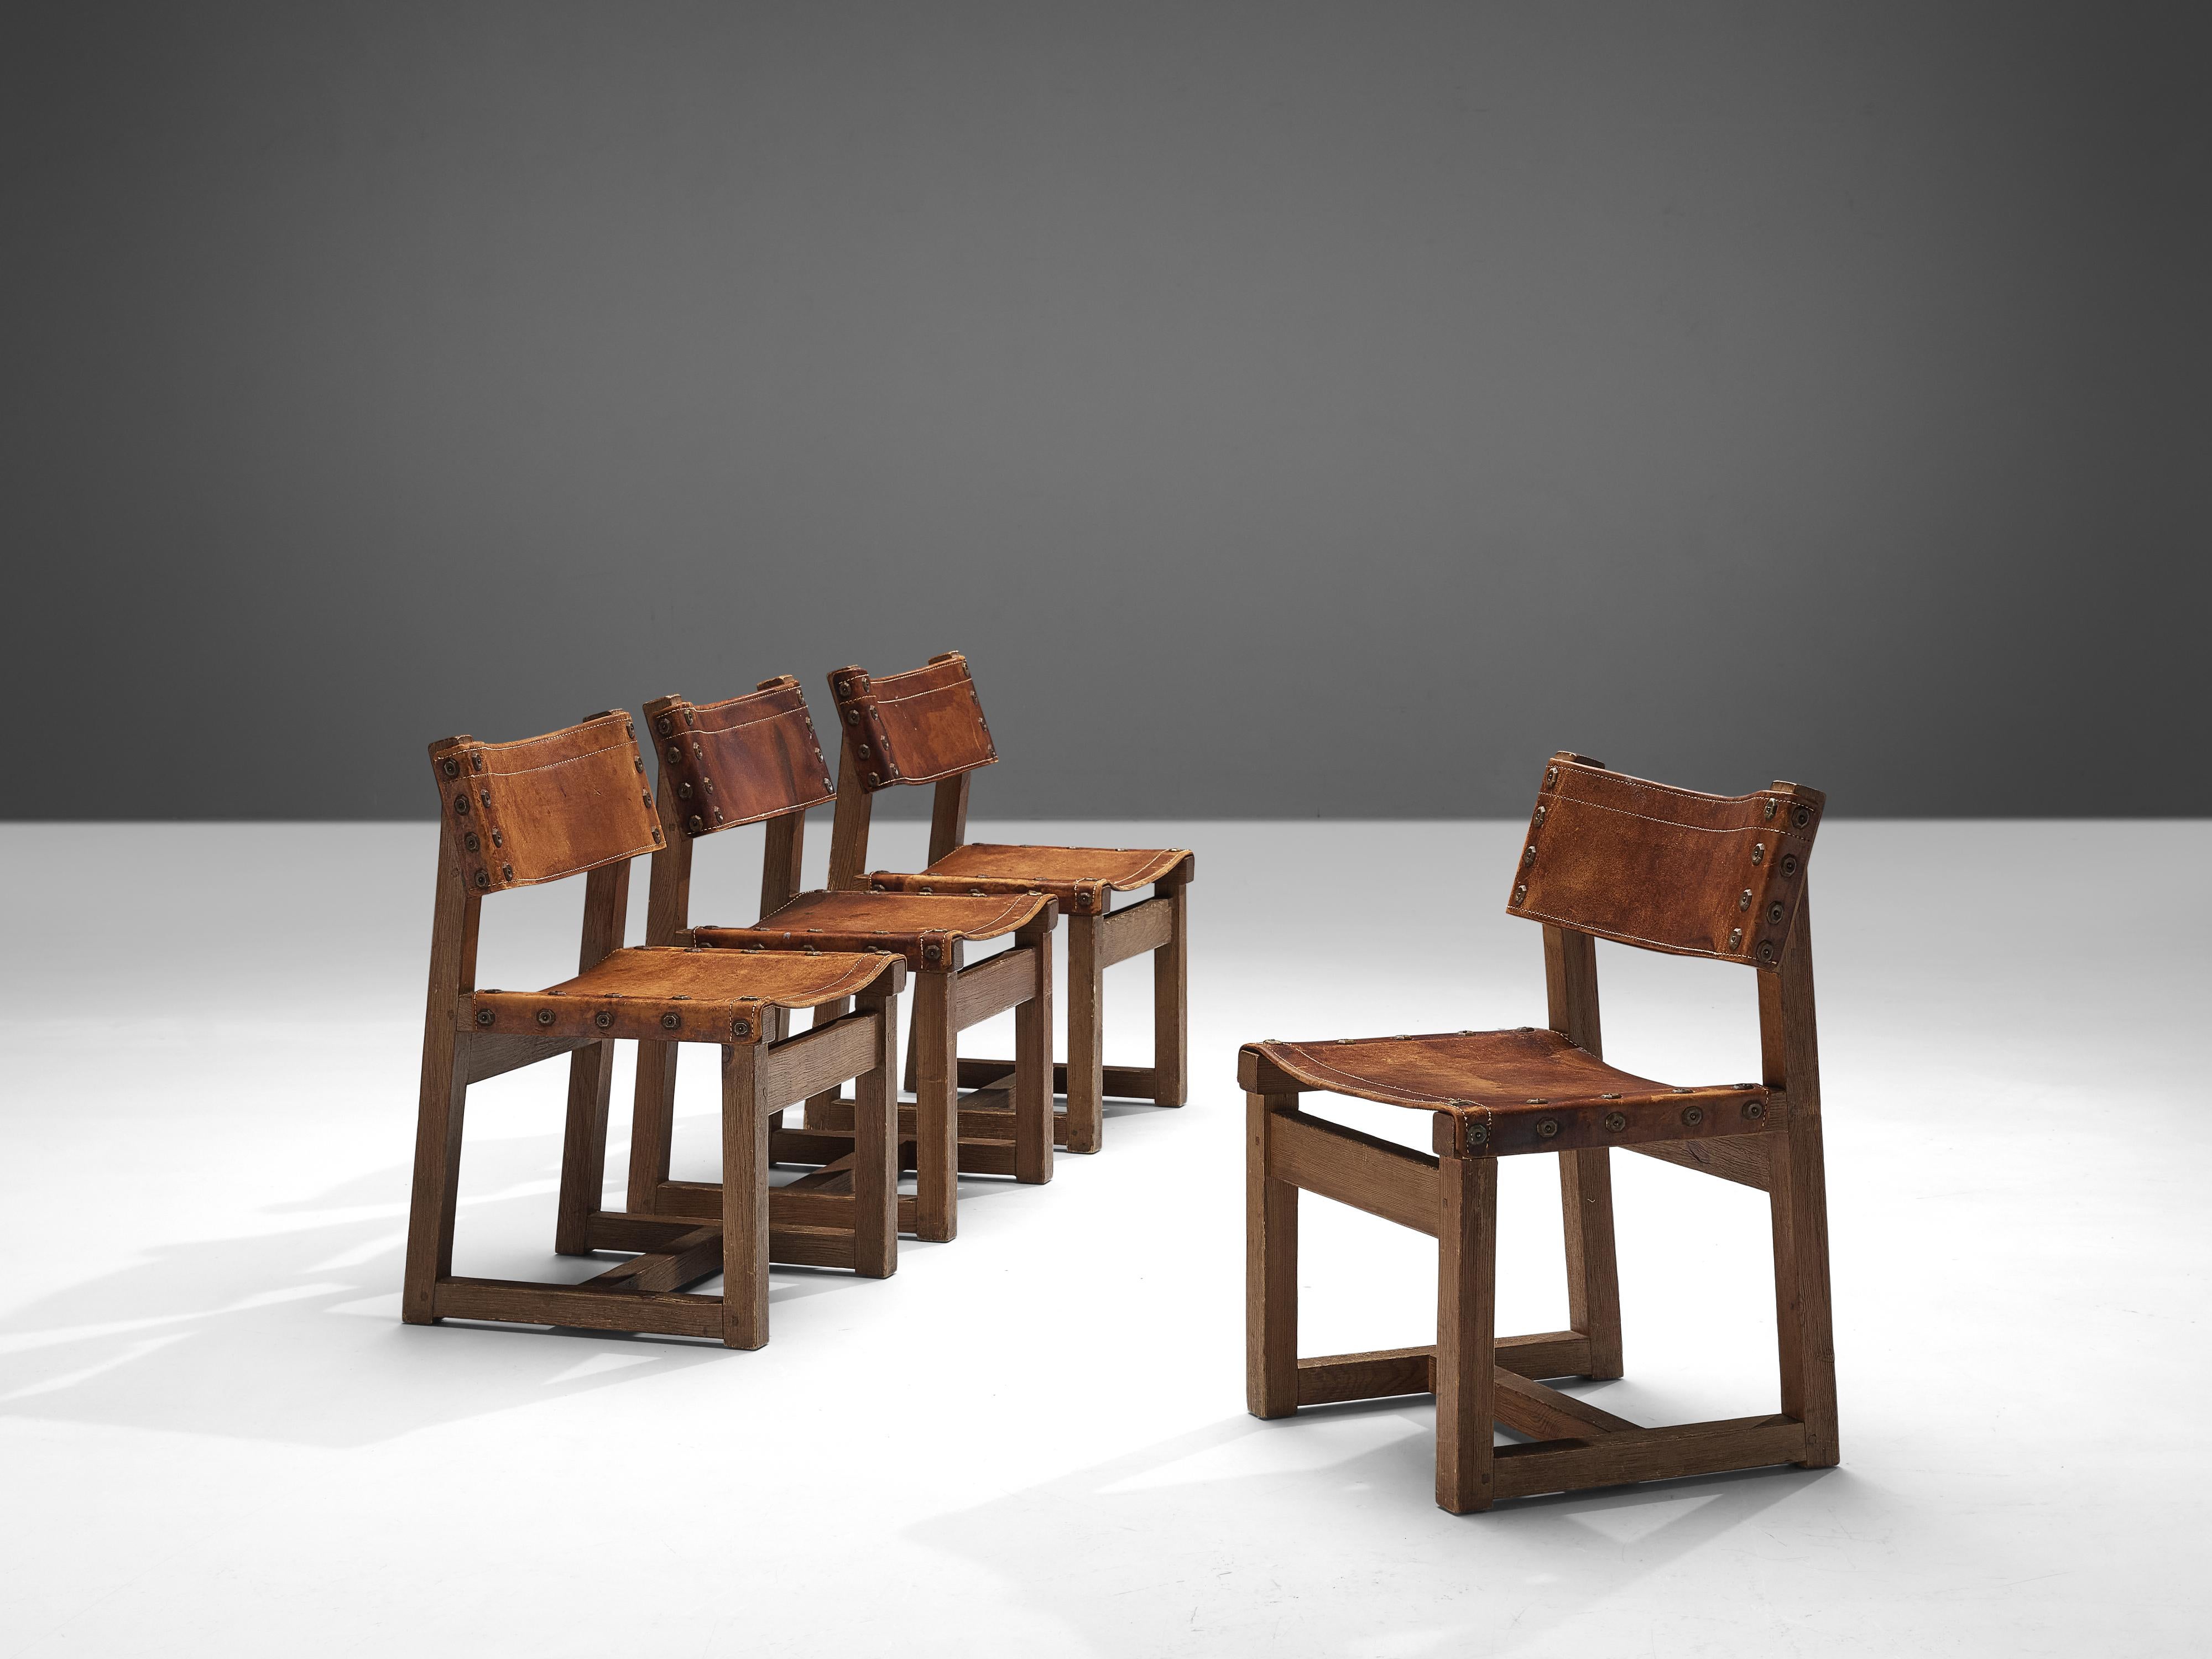 Biosca, set of four chairs, leather, pine, Spain, 1950s 

Sturdy chairs manufactured by the Spanish Biosca. These chairs are made of pine and have stunning, cognac leather seating. The chairs have a robust look, which is emphasized by decorative